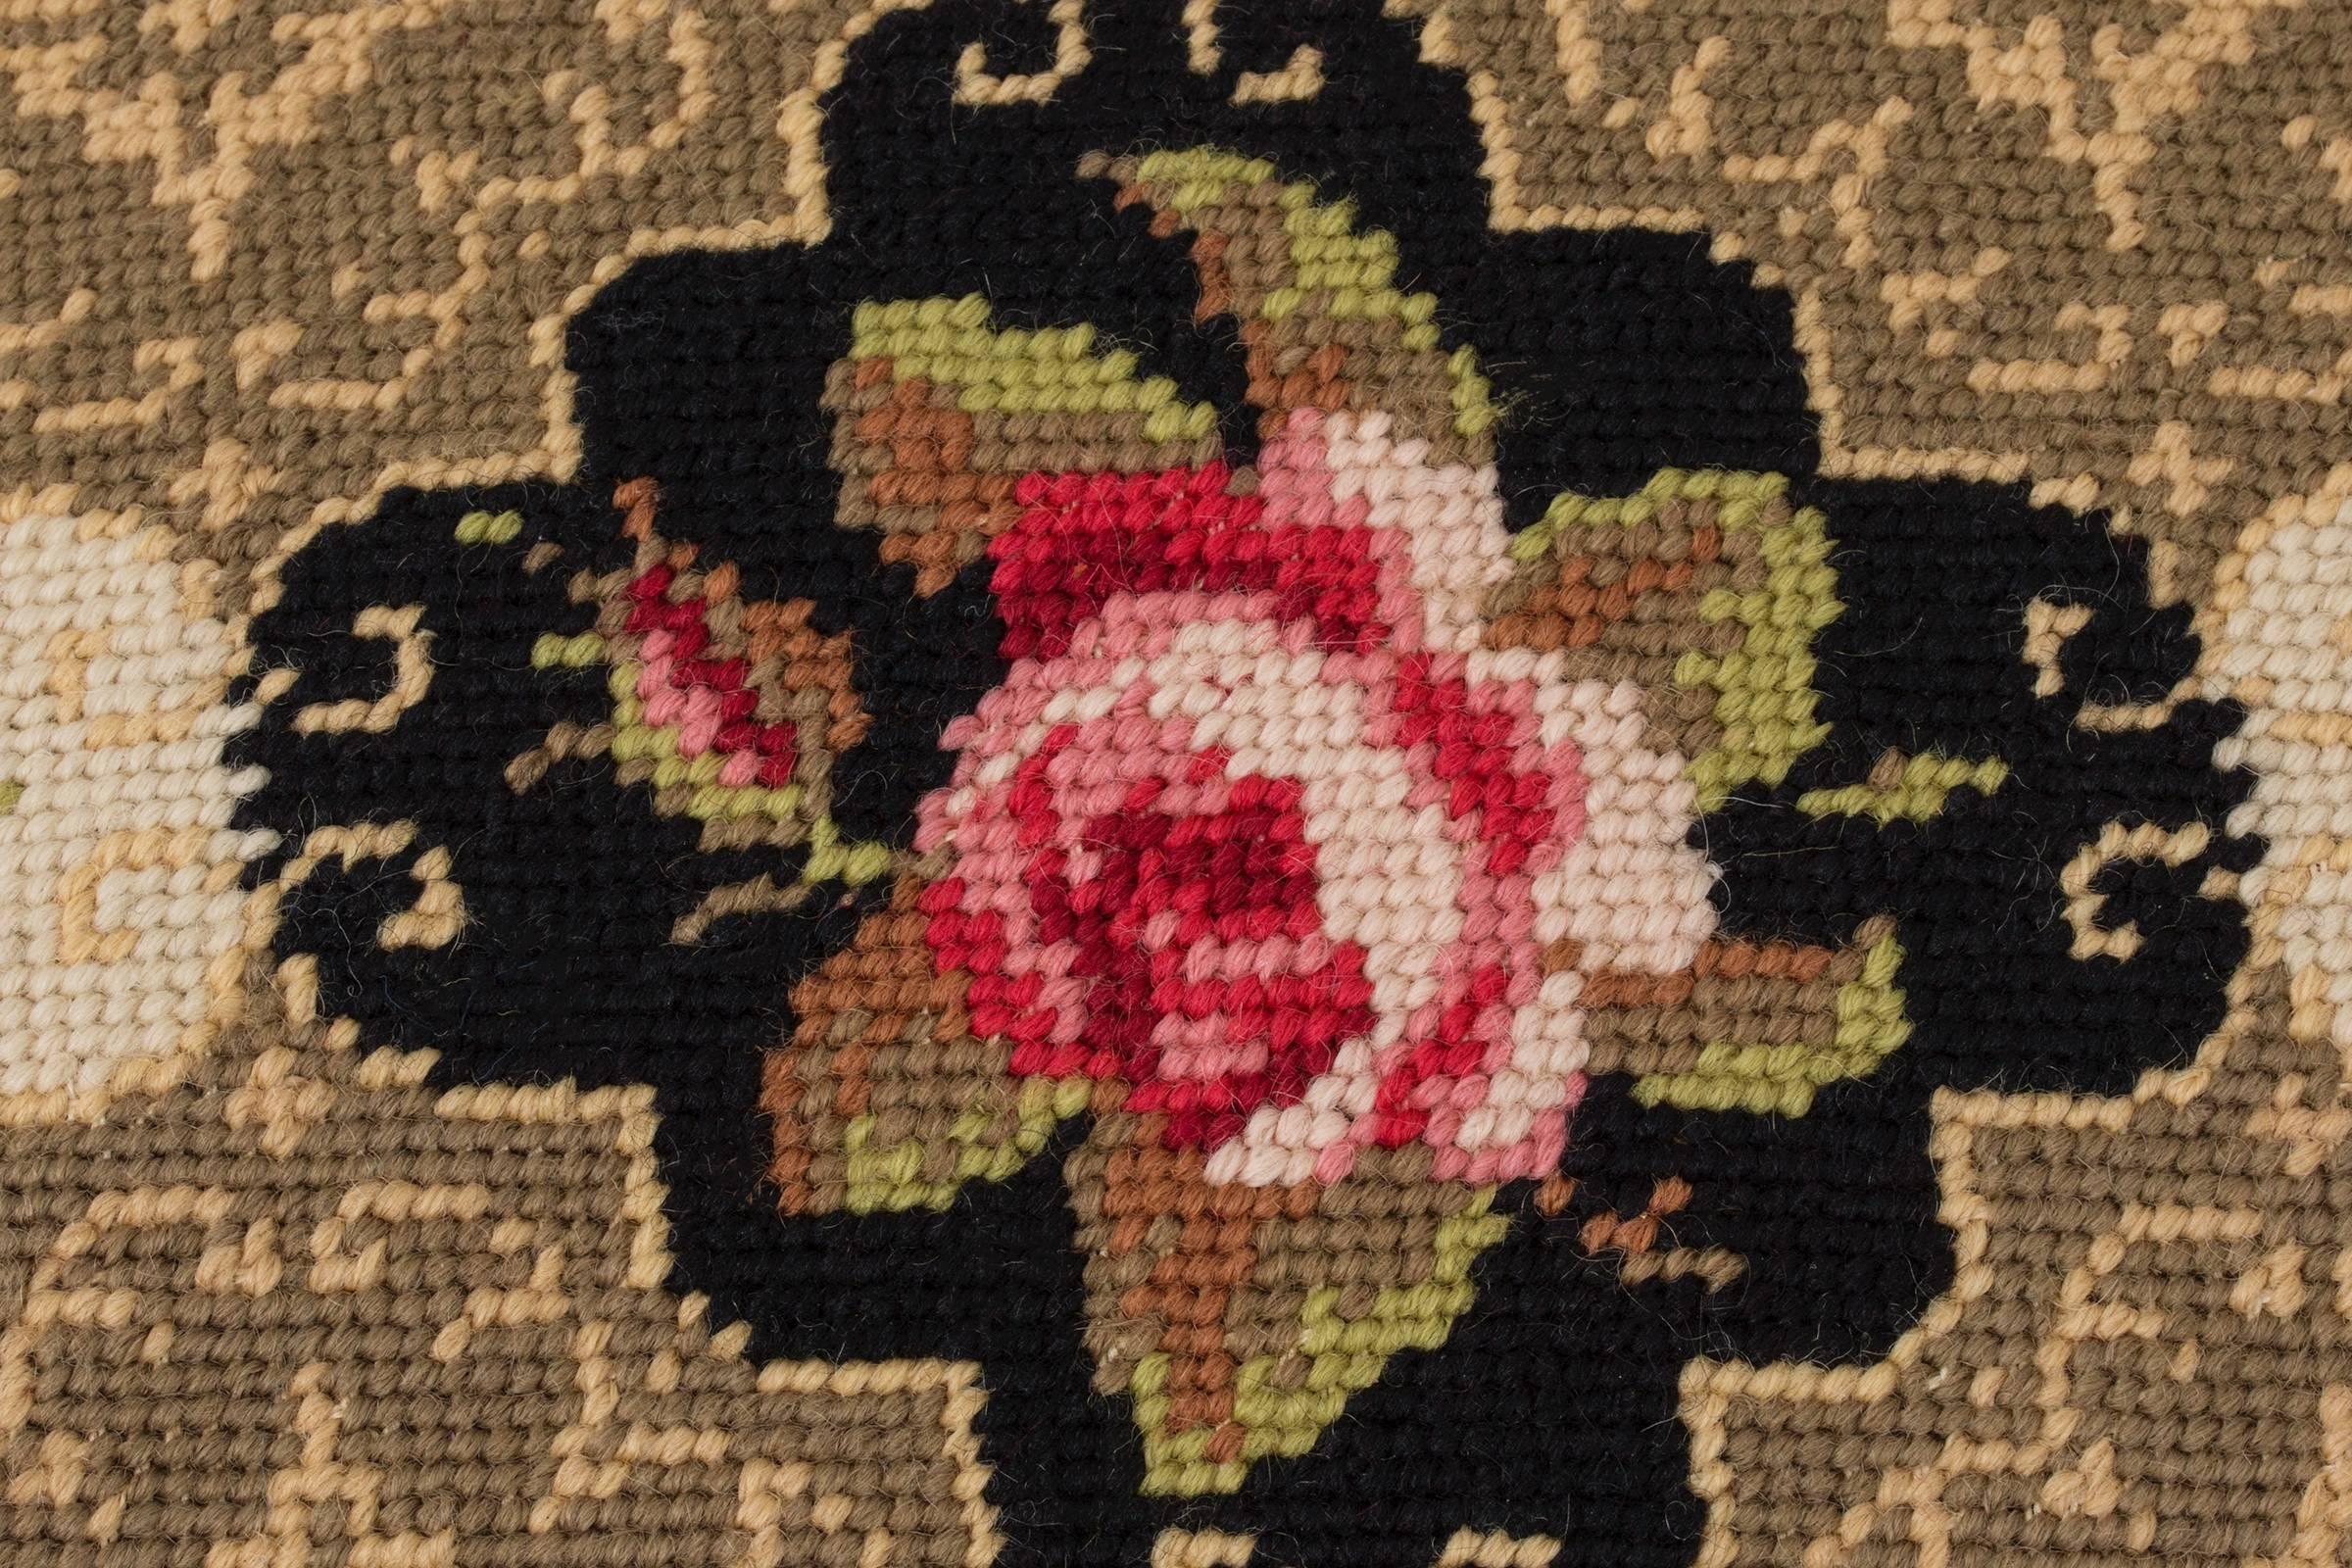 Late 20th Century French Needlepoint Pillow